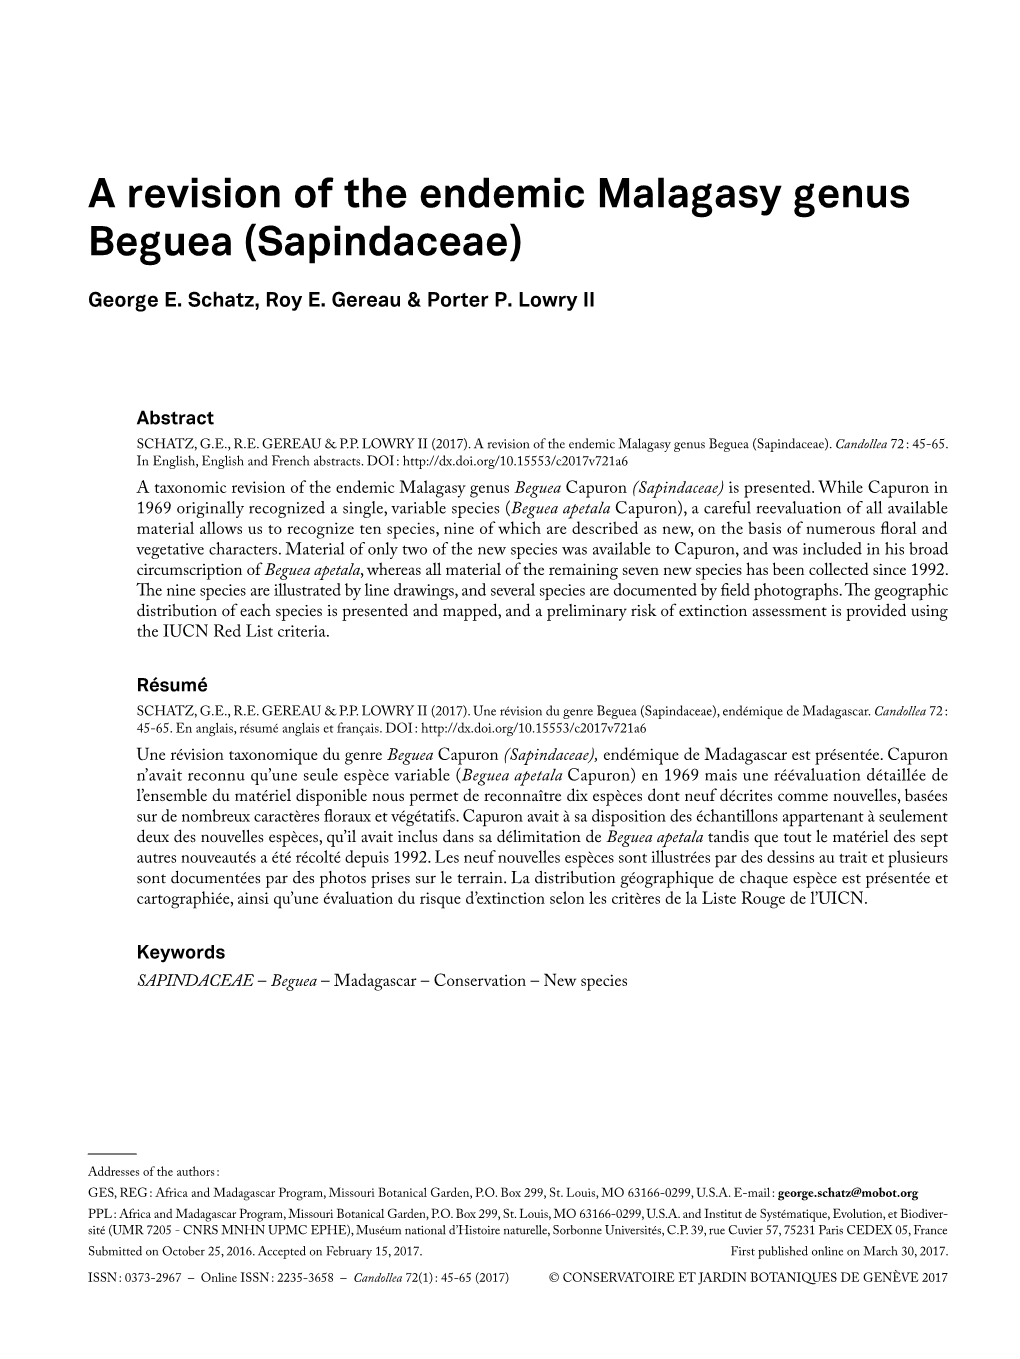 A Revision of the Endemic Malagasy Genus Beguea (Sapindaceae)